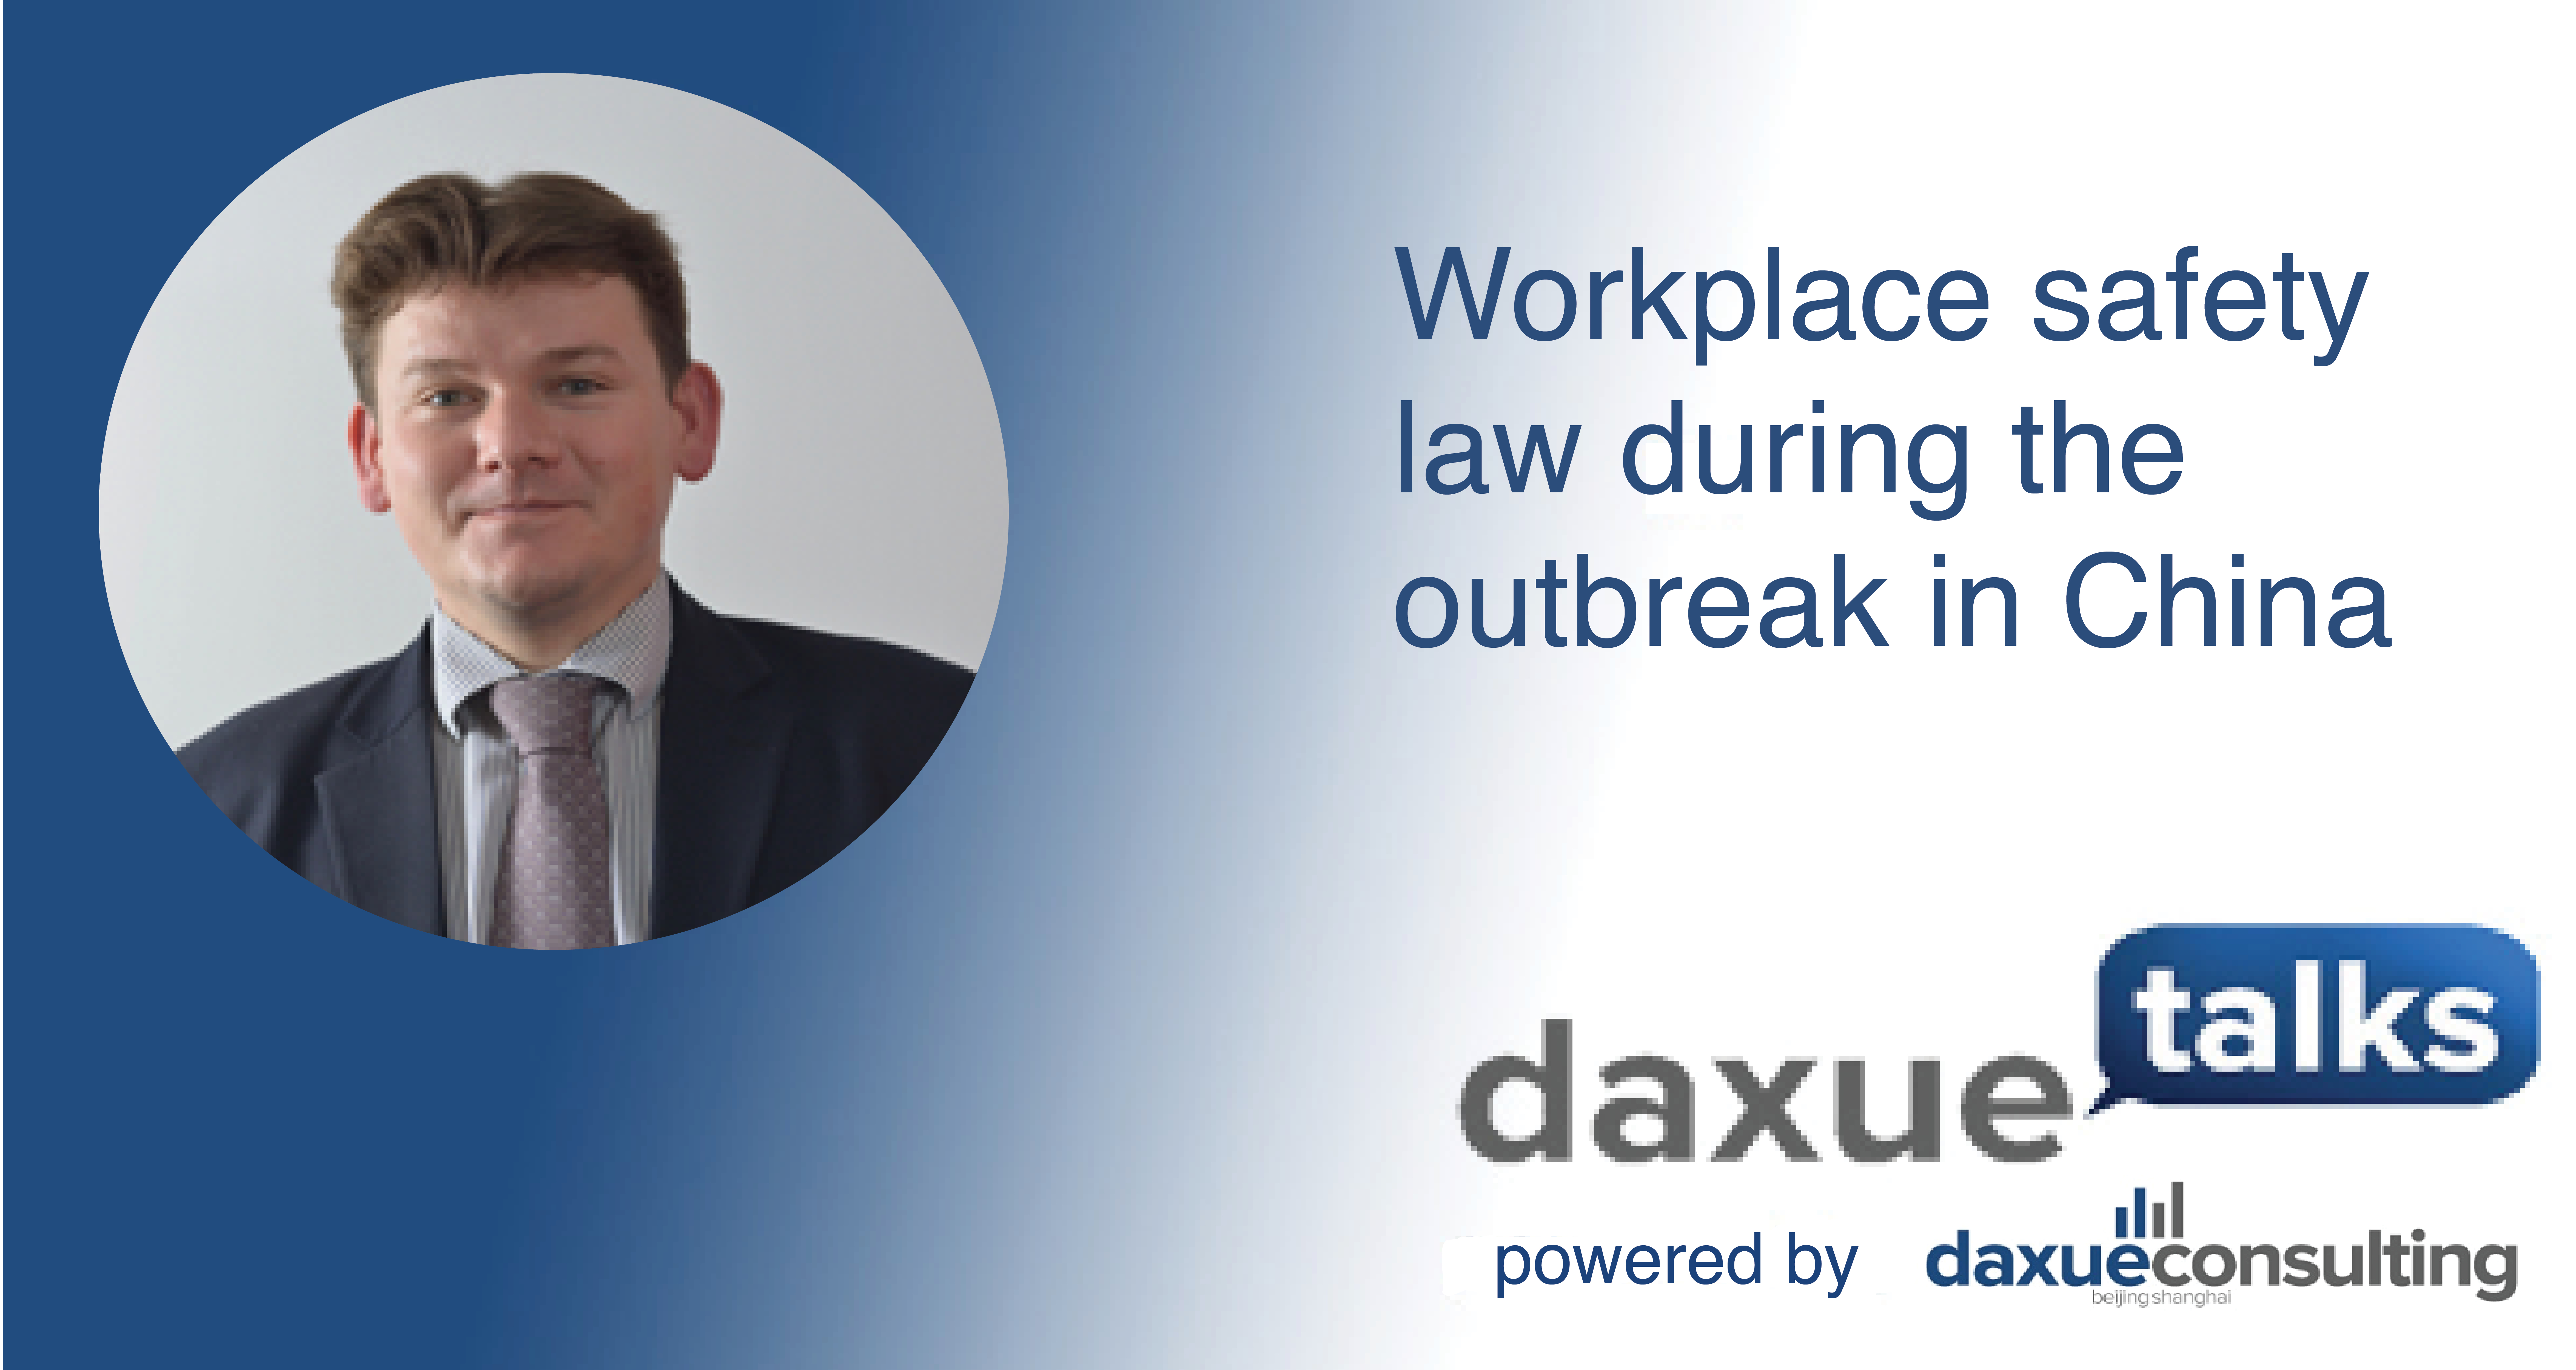 Daxue Talks transcript #37: Workplace safety law during the outbreak in China